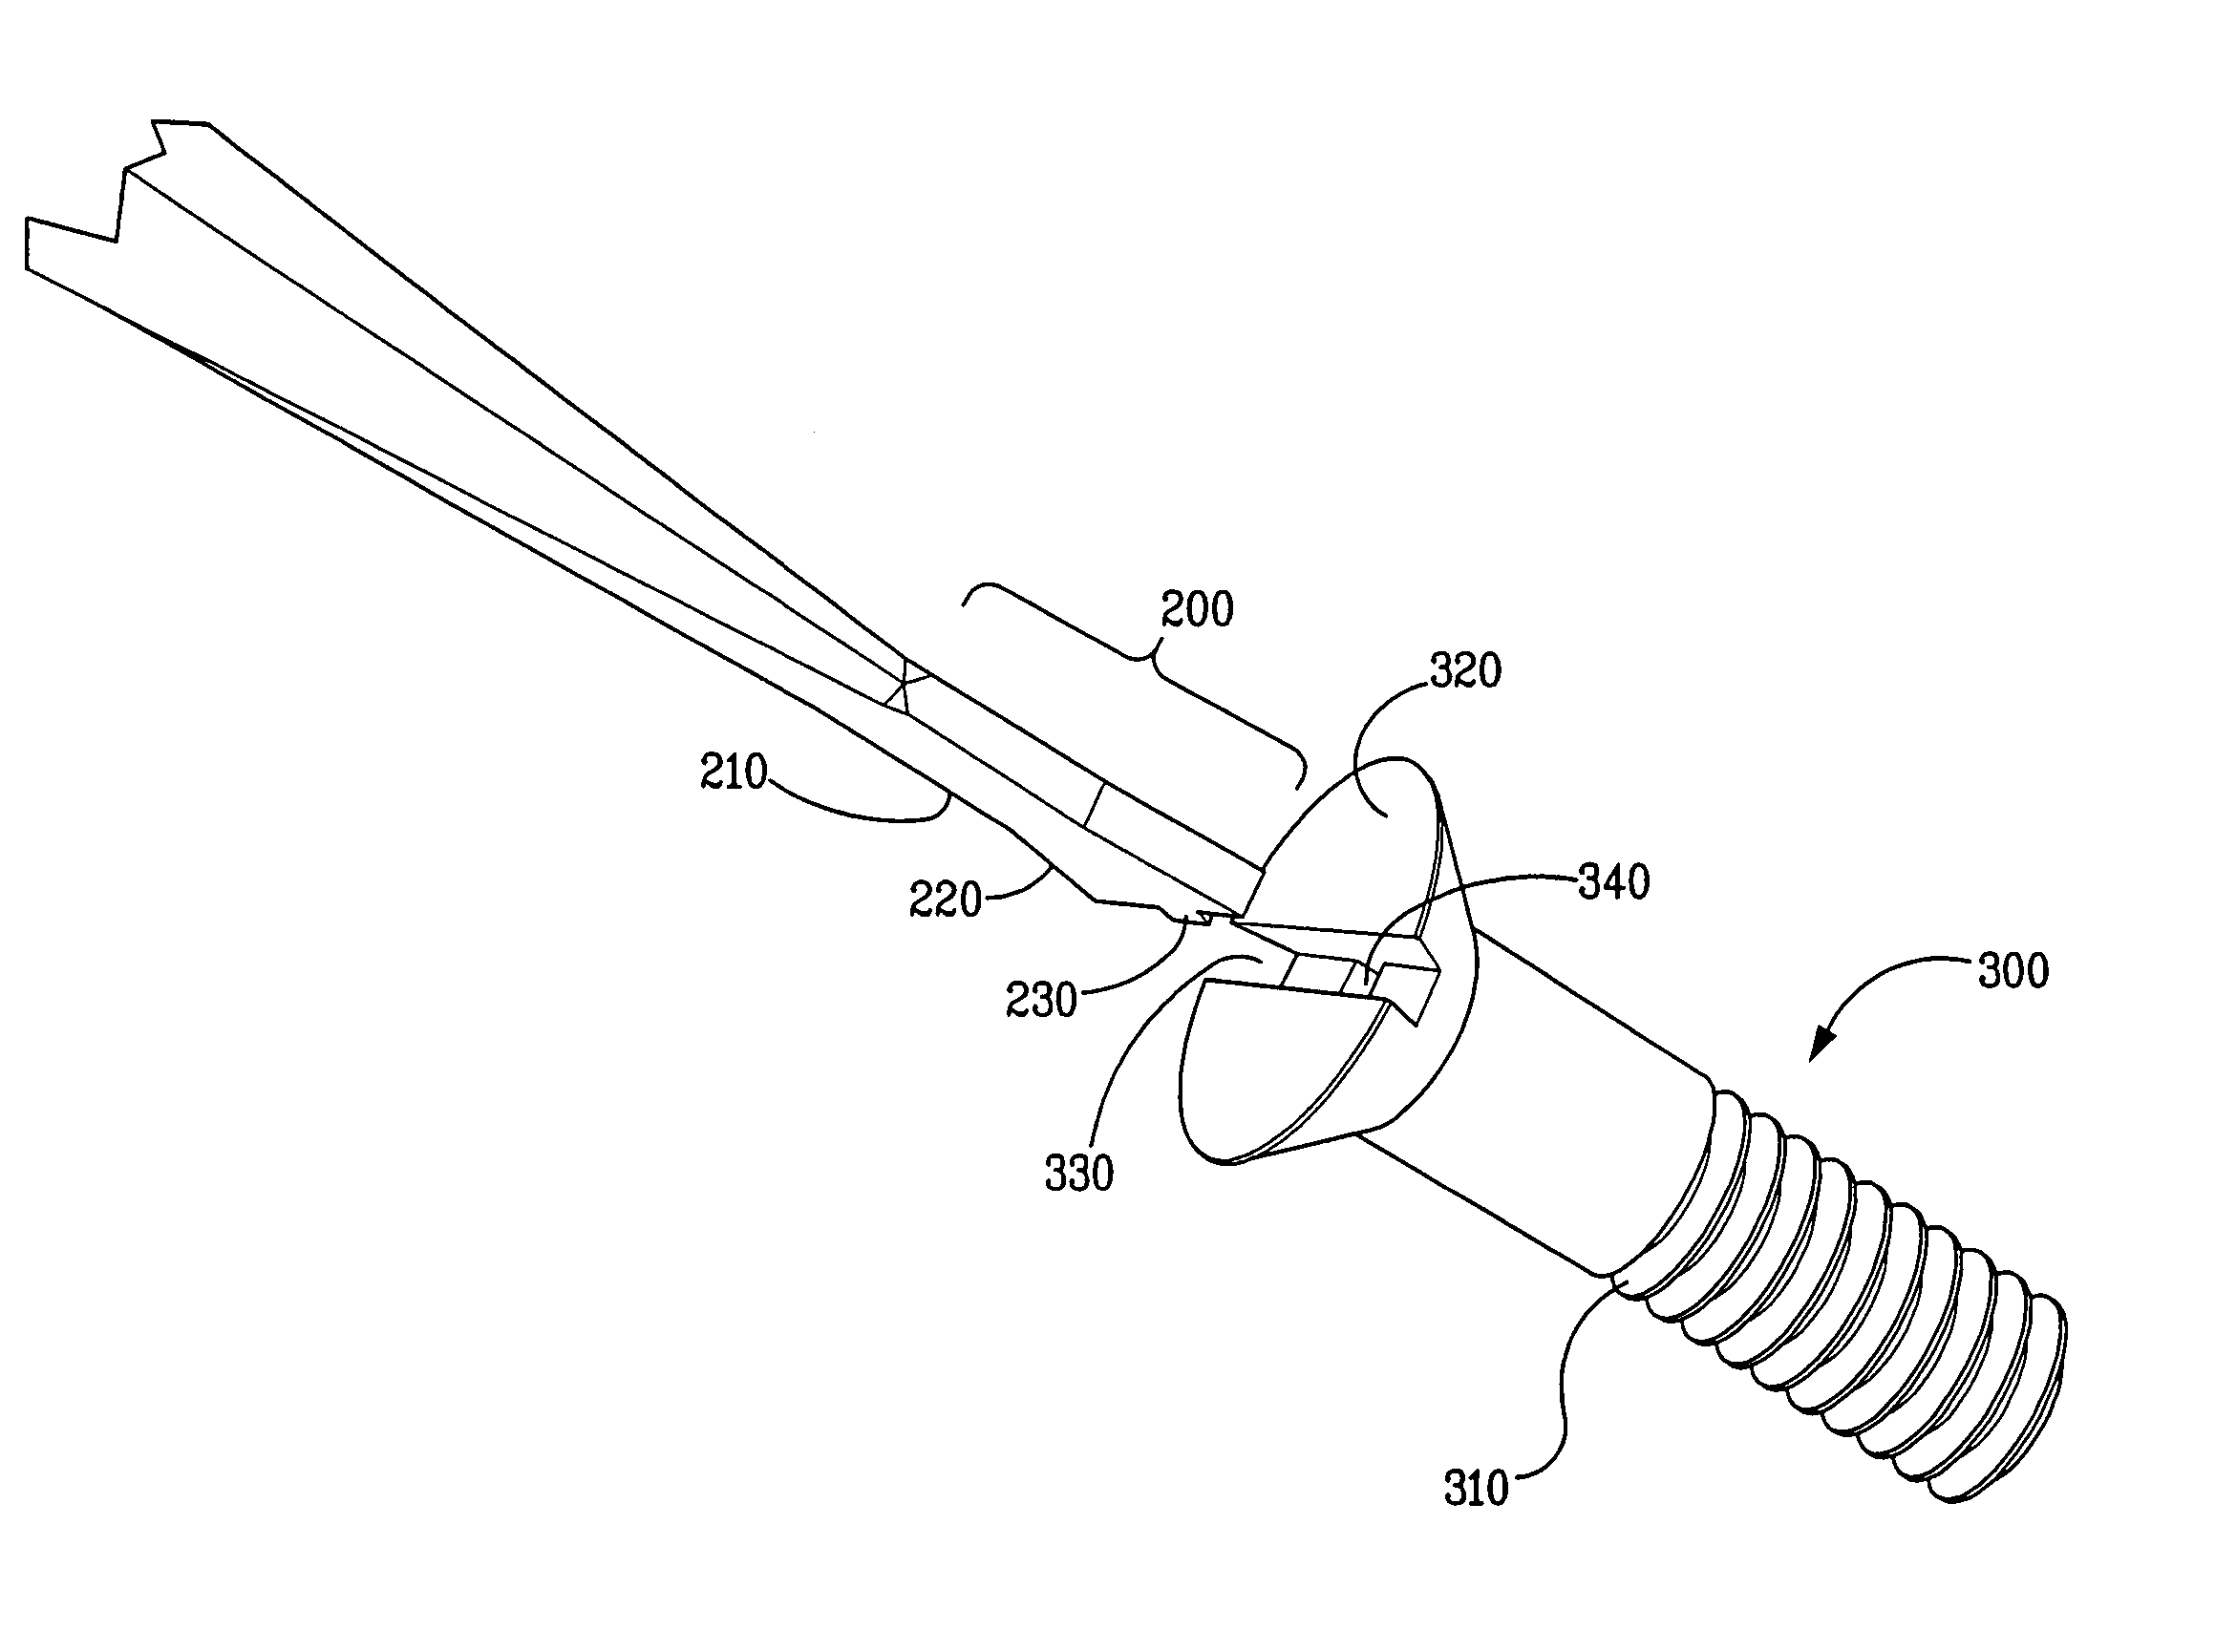 Tool element and screw for mating engagement therewith